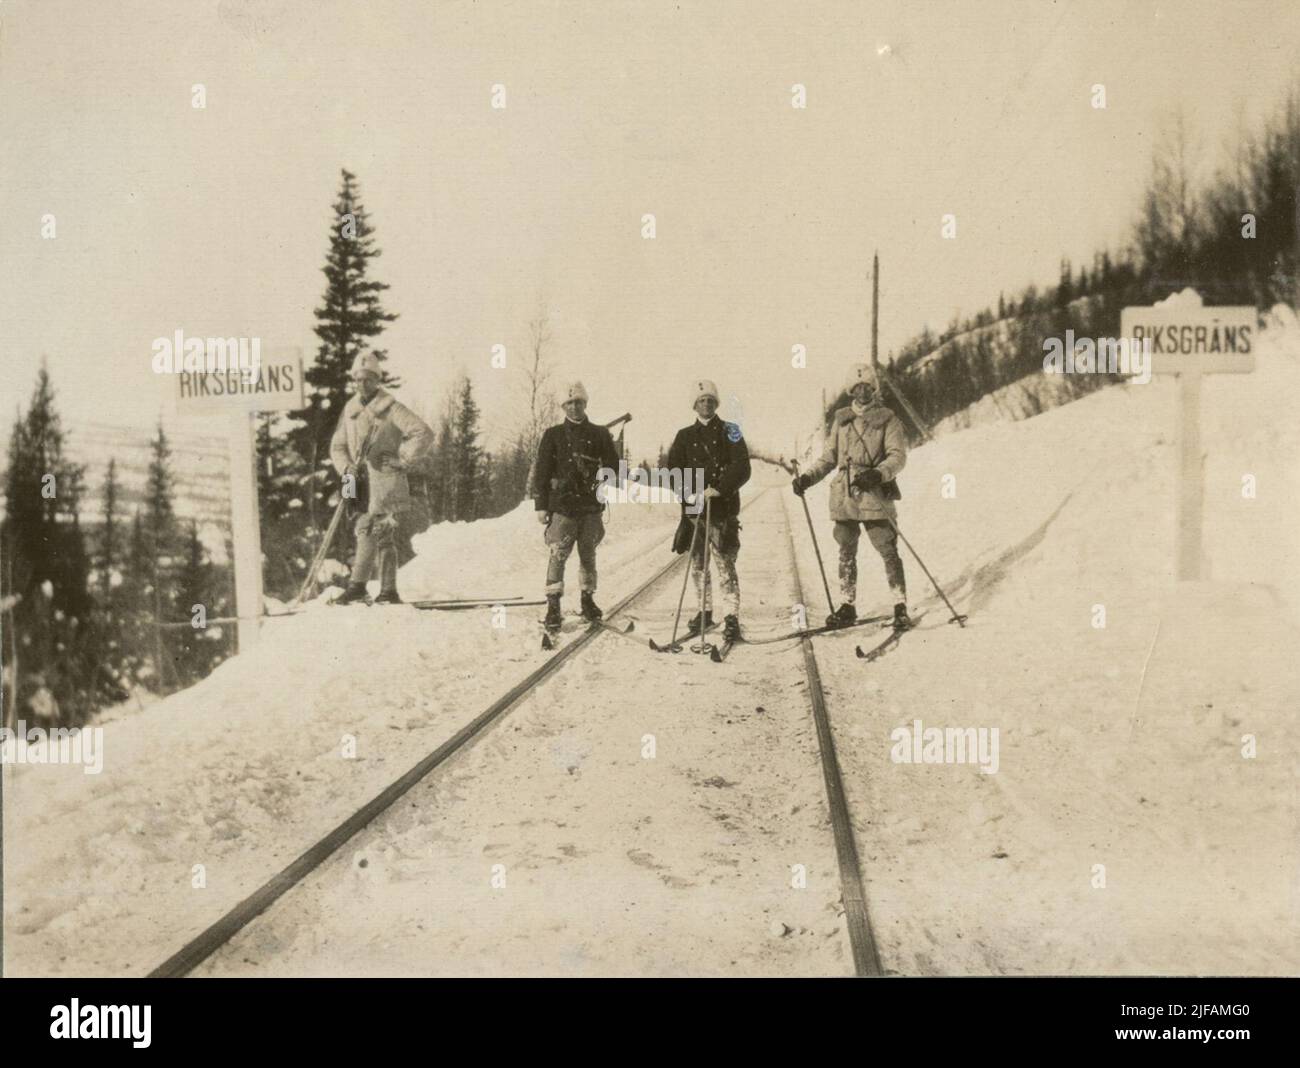 The national border between Sweden and Norway. Four soldiers on skis are on the rail rails between two signs with text 'Riksgräns. Behind the group are some trees and mountains. Stock Photo